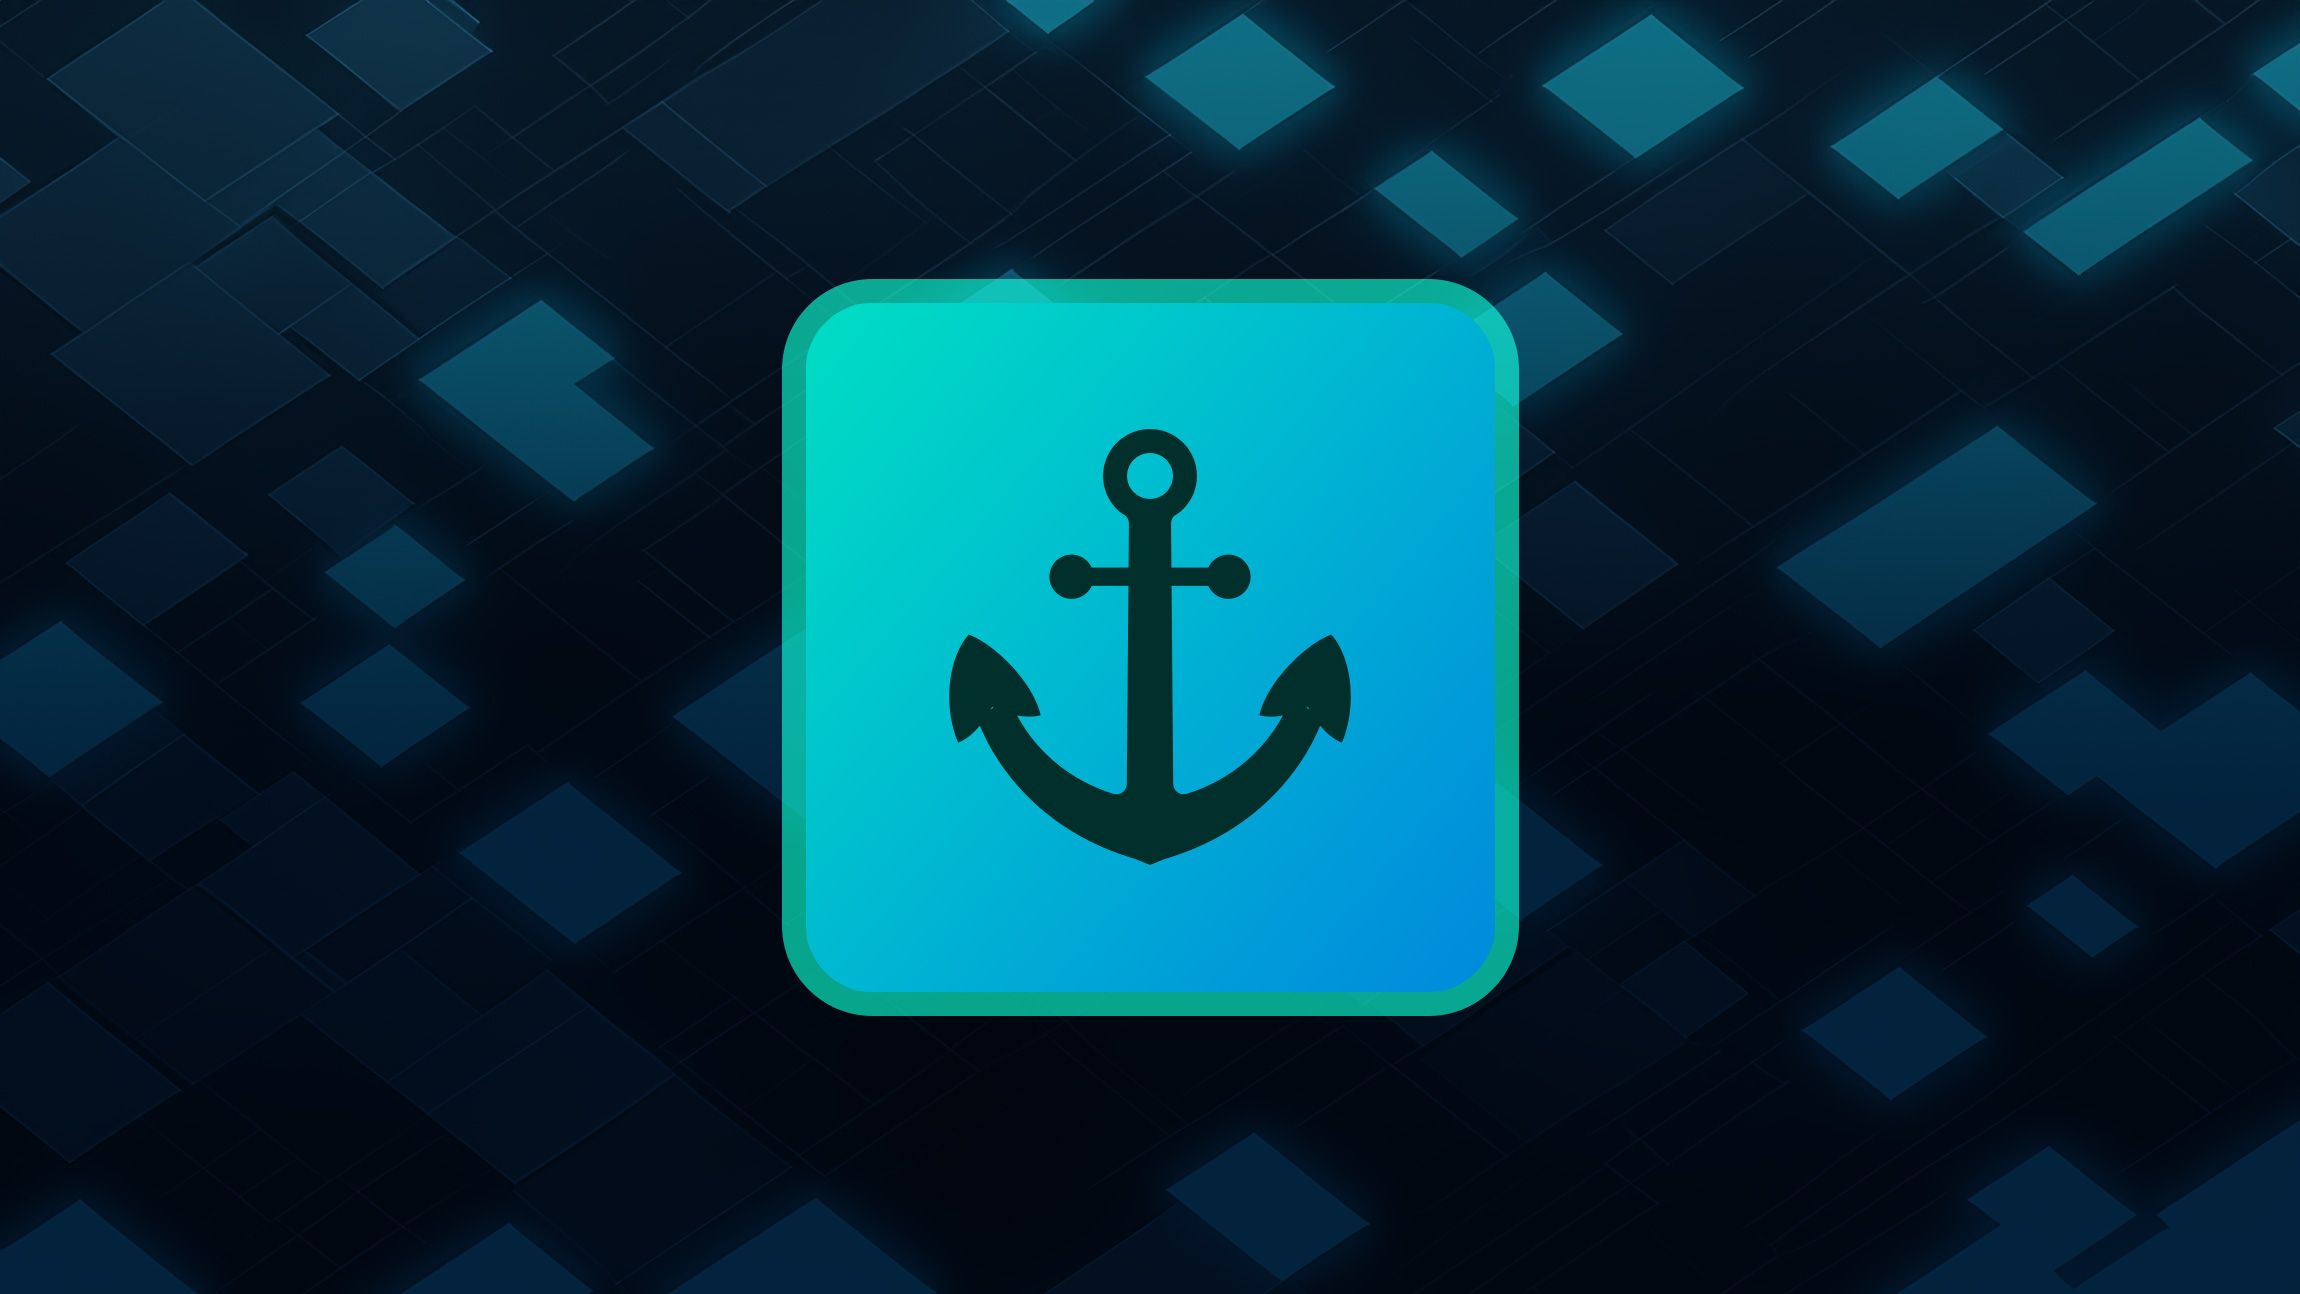 A boats anchor agains a futuristic background with rectangle patterns